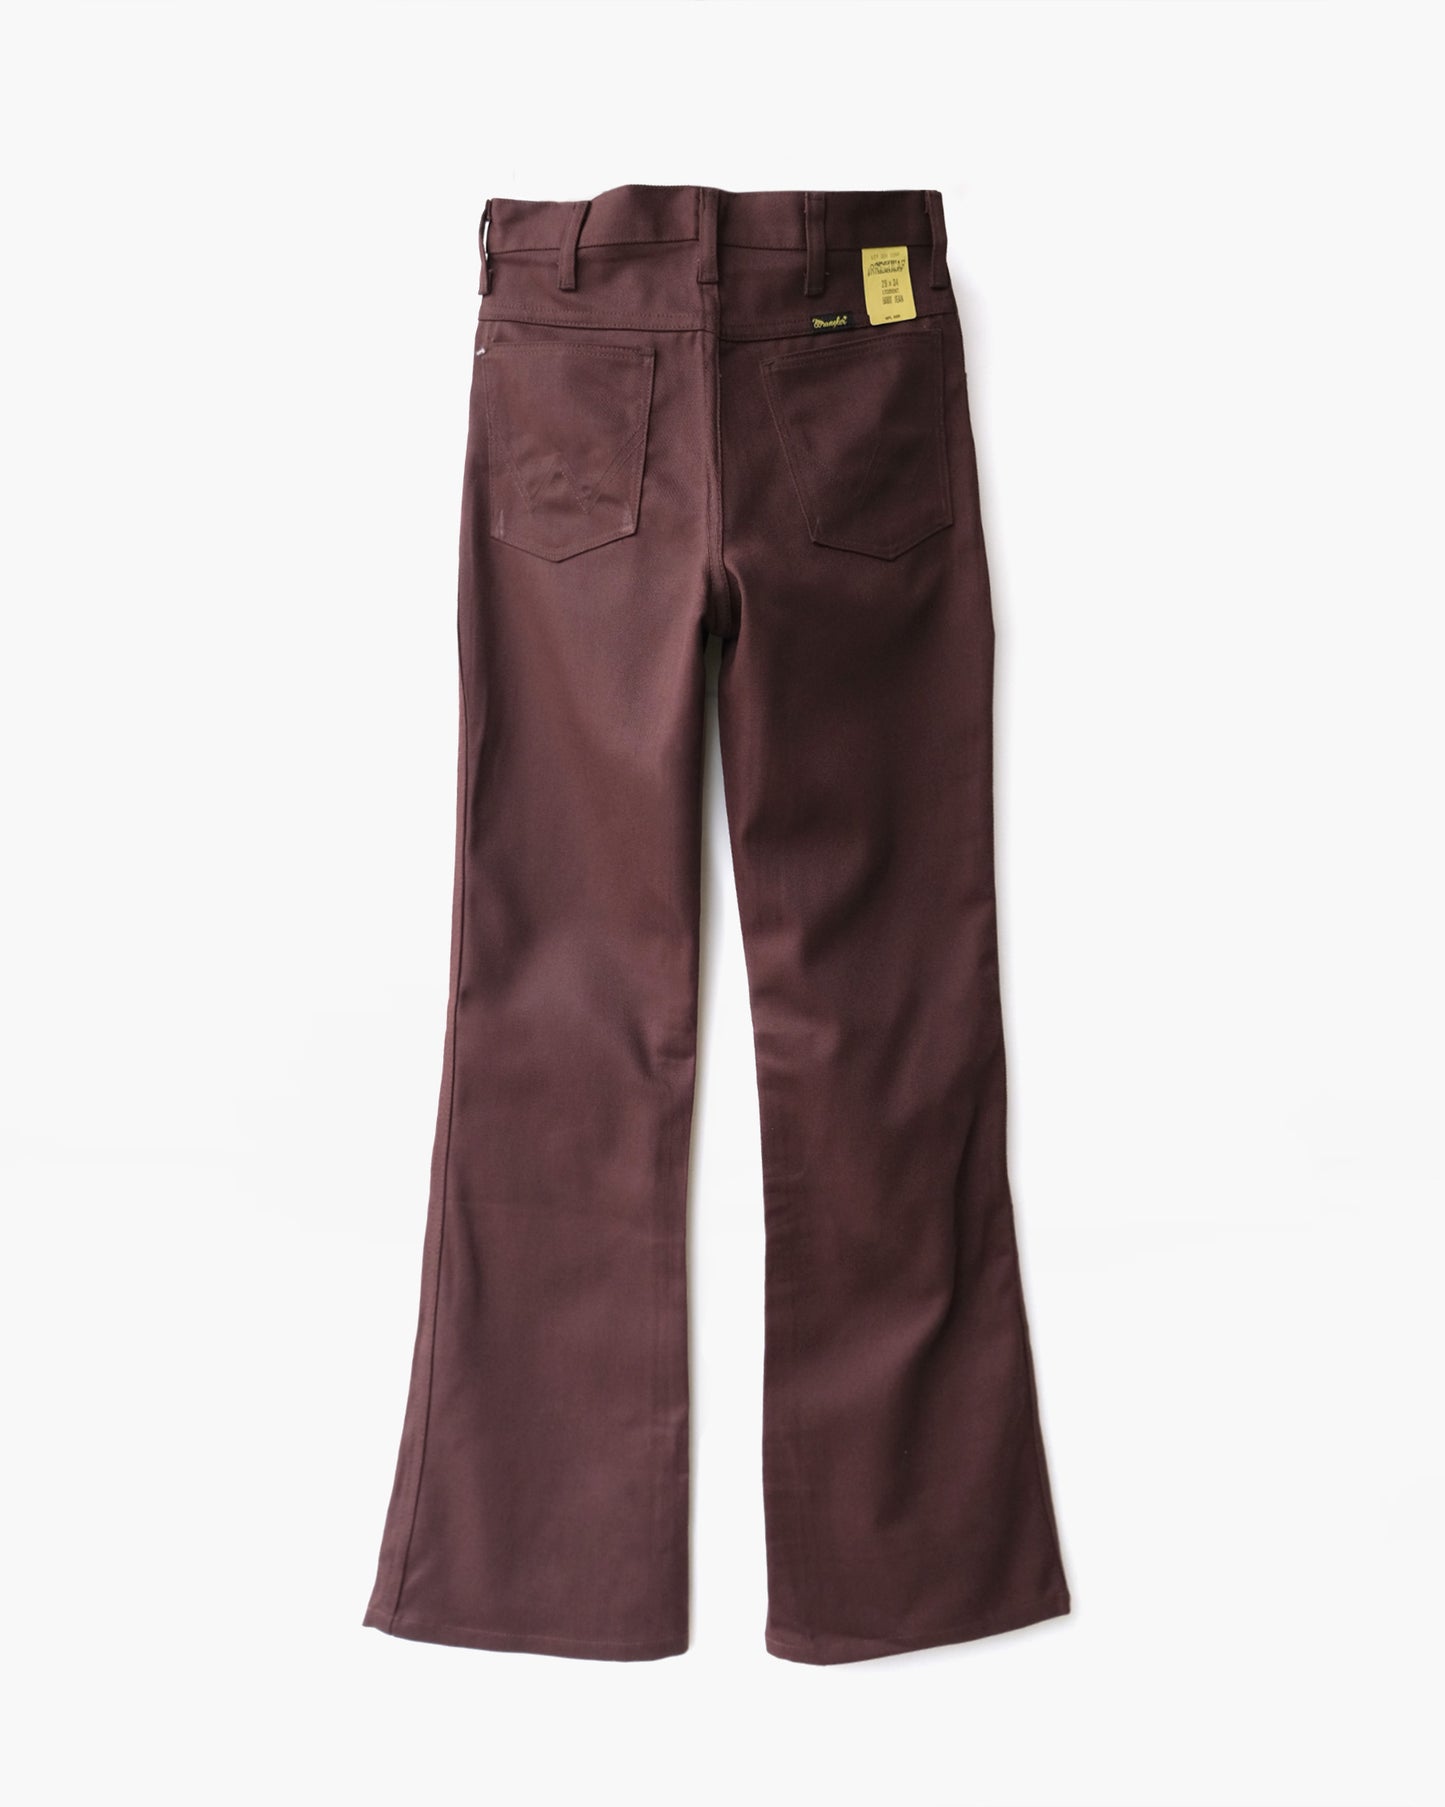 Wrangler Student Boot Jeans Brown